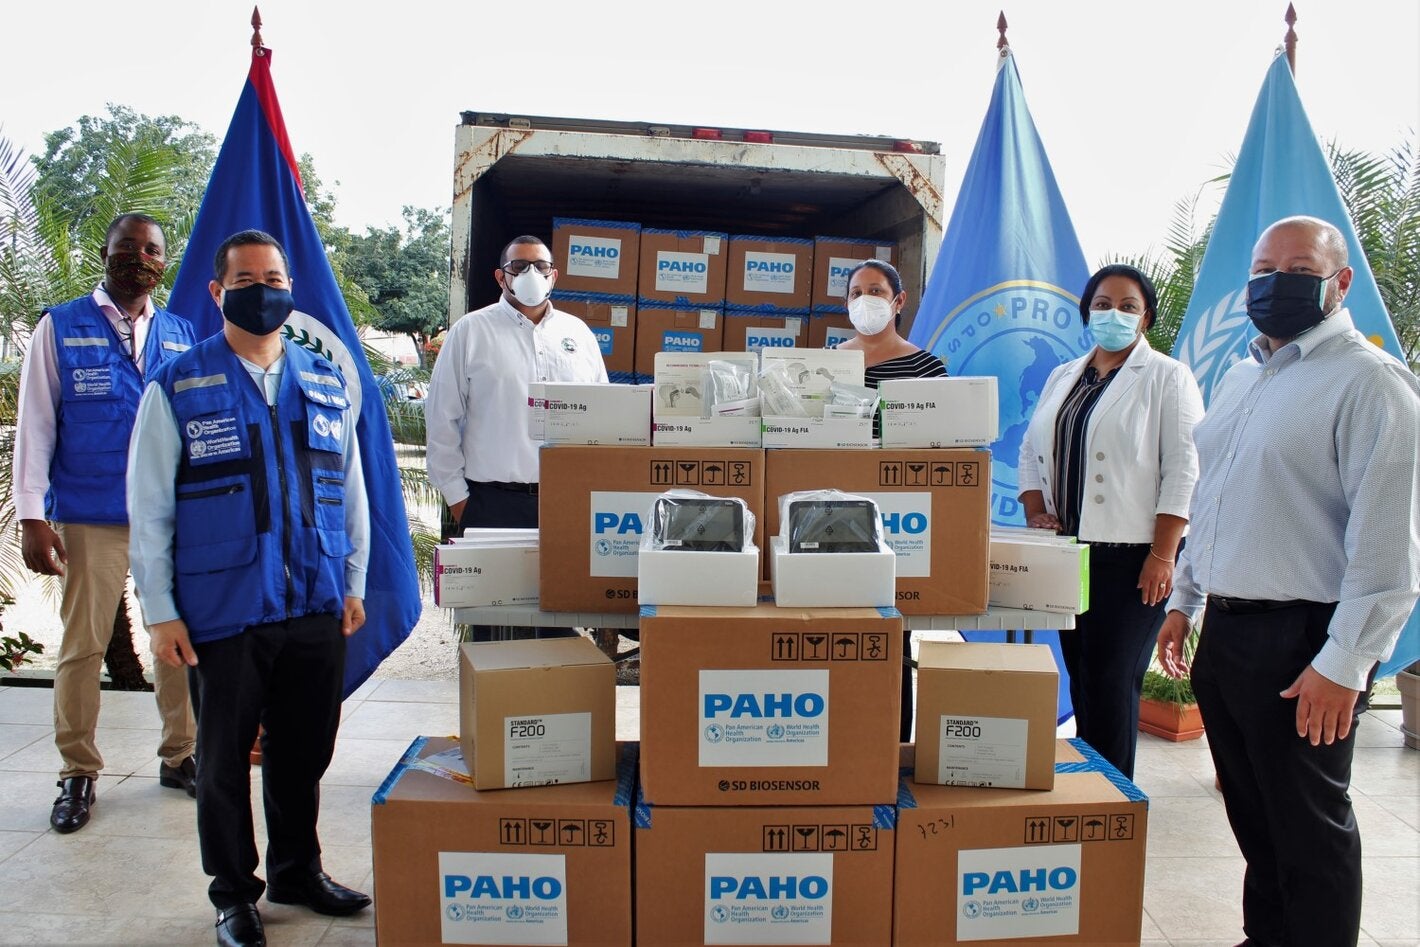 Pahowho Belize Donates 94975 Antigen Tests With Antigen Controls And Rapid Diagnostic Test Analyzers To Increase The Lab Capacity Efforts For Covid-19 Testing In Belize - Pahowho Pan American Health Organization